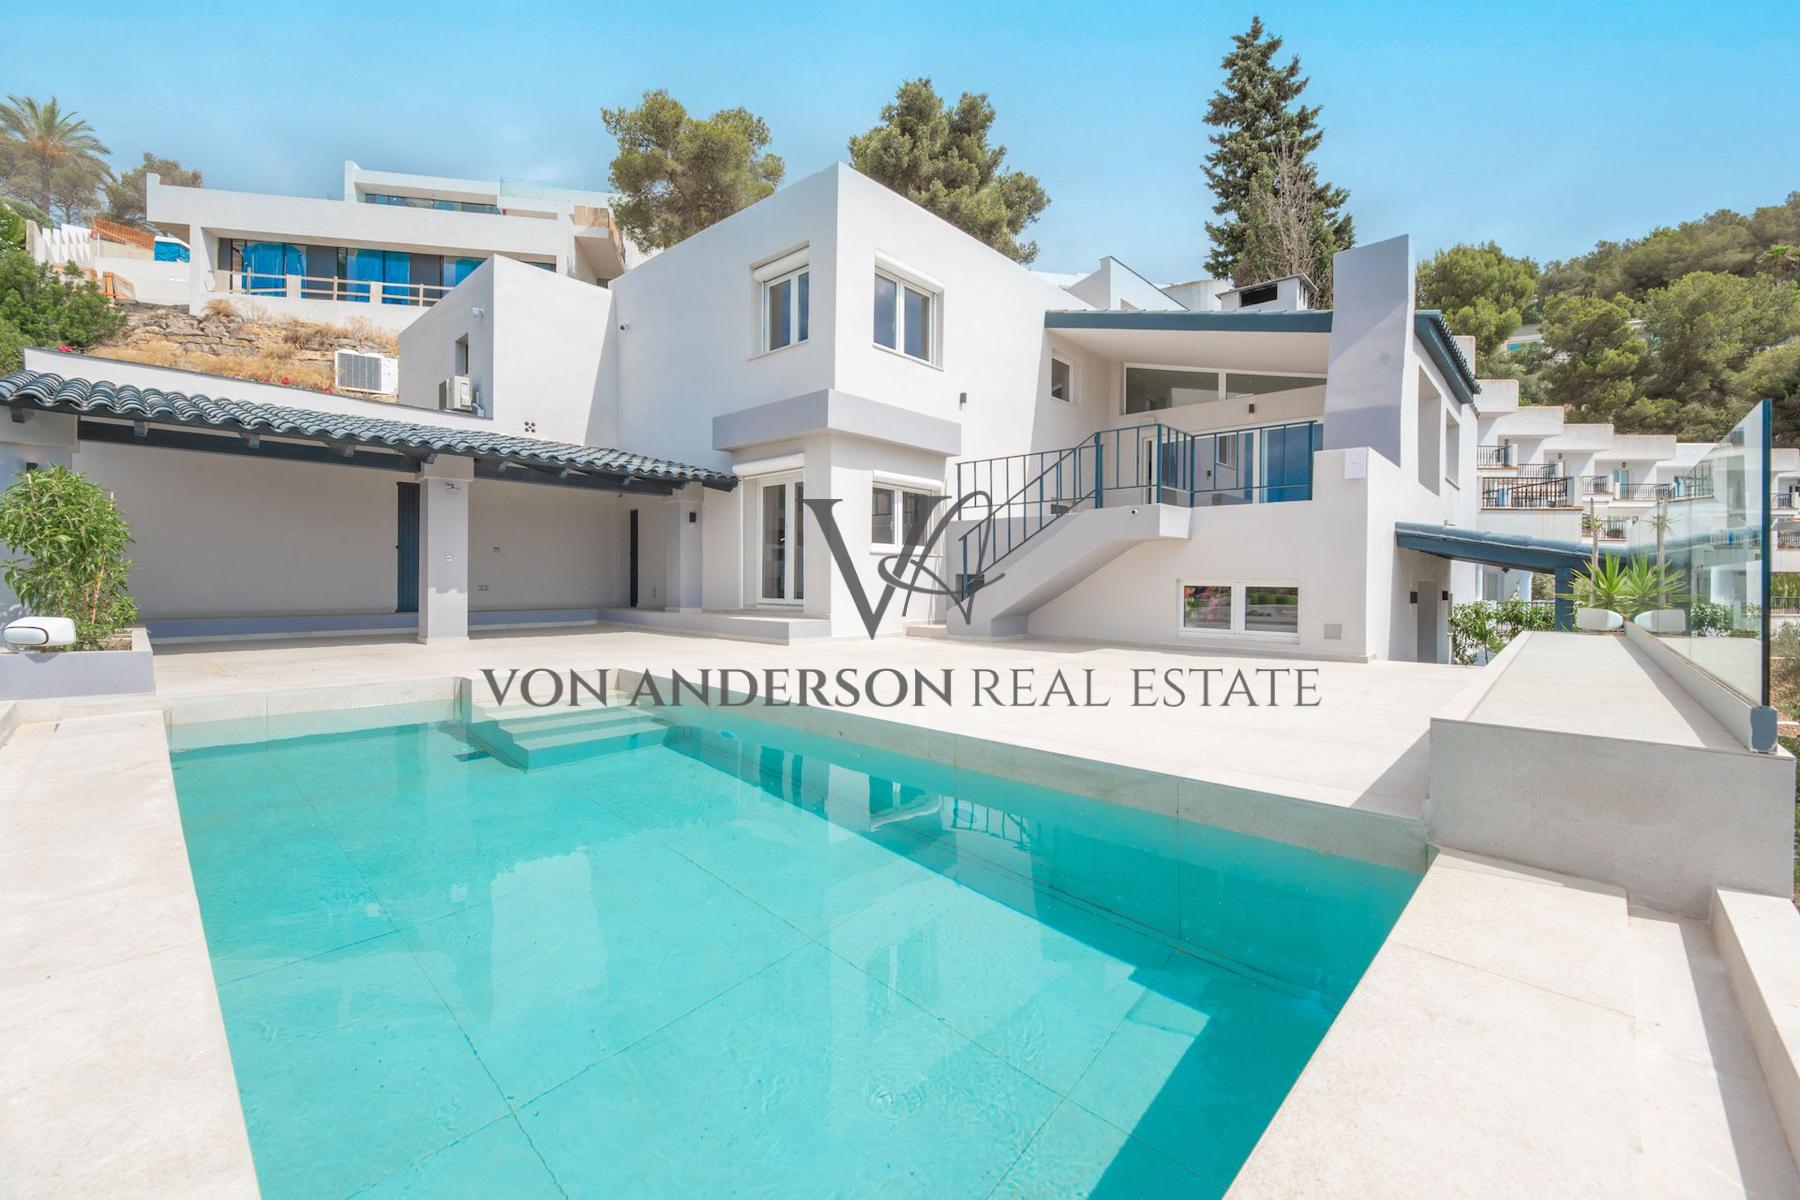 Recently Constructed Detached Villa of the Highest Caliber with a Tourist License, ref. VA1022, for sale in Ibiza by Von Anderson Real Estate